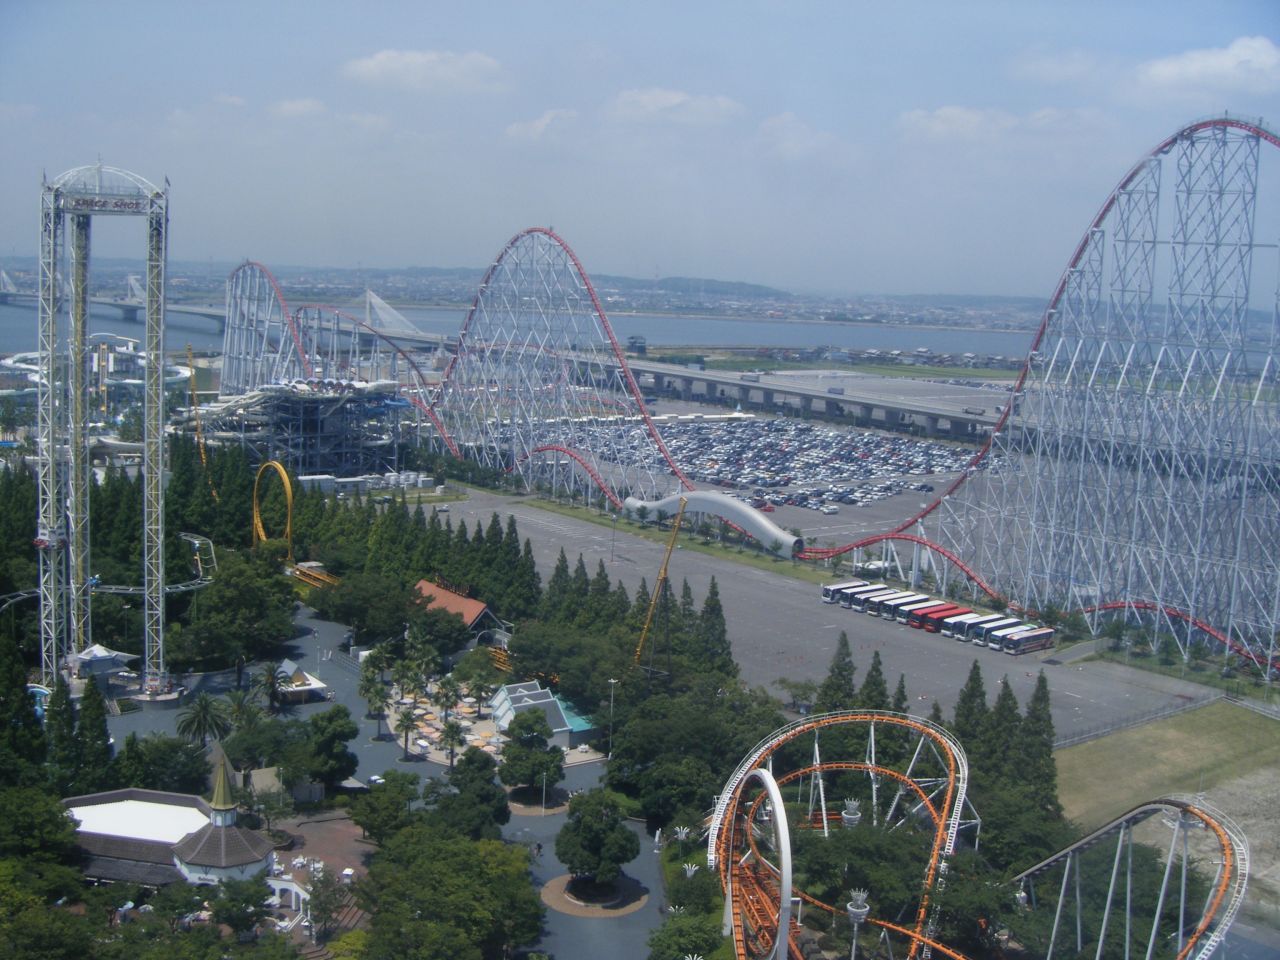 Check out the Steel Dragon roller coaster at Nagashima Spa Land in Japan. 